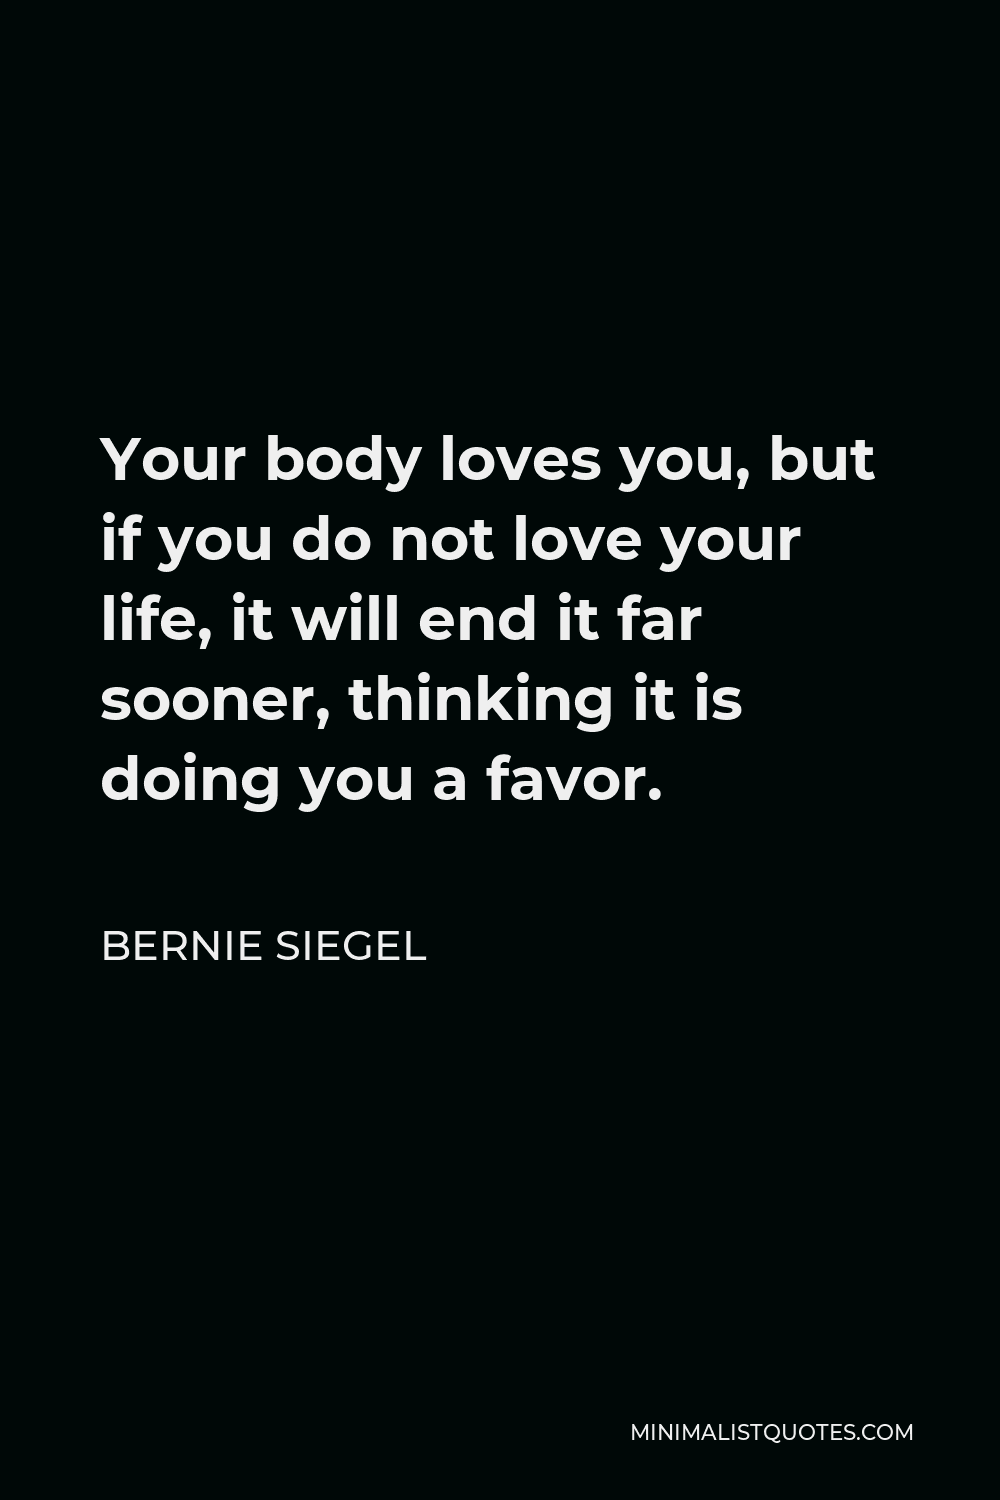 Bernie Siegel Quote - Your body loves you, but if you do not love your life, it will end it far sooner, thinking it is doing you a favor.